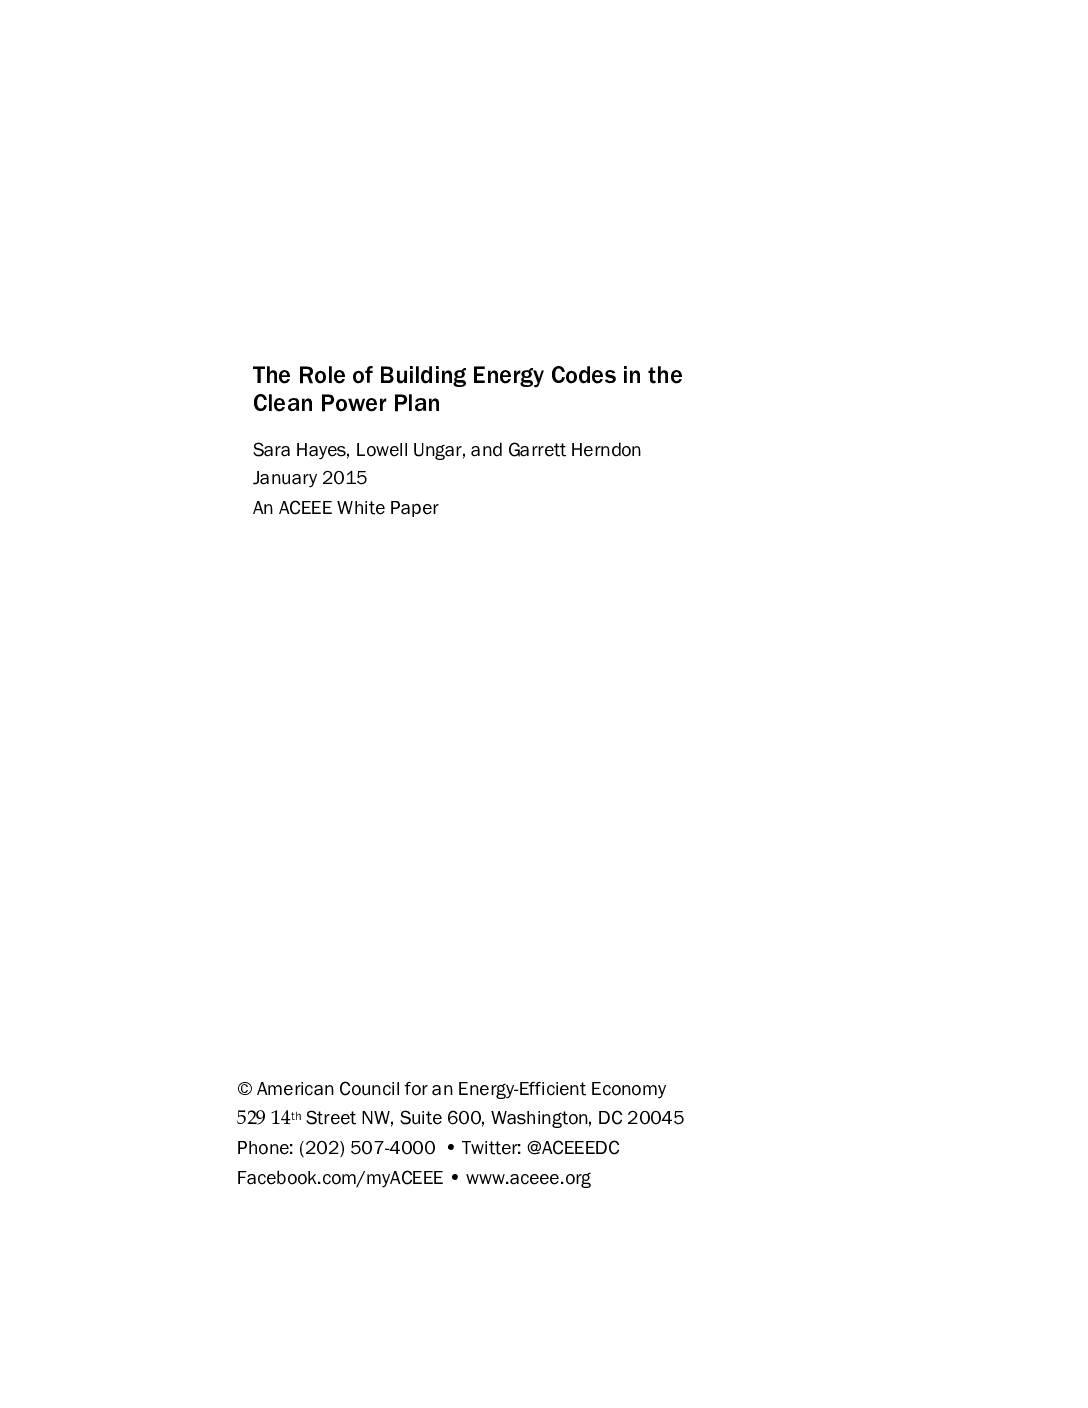 The Role of Building Energy Codes in the Clean Power Plan